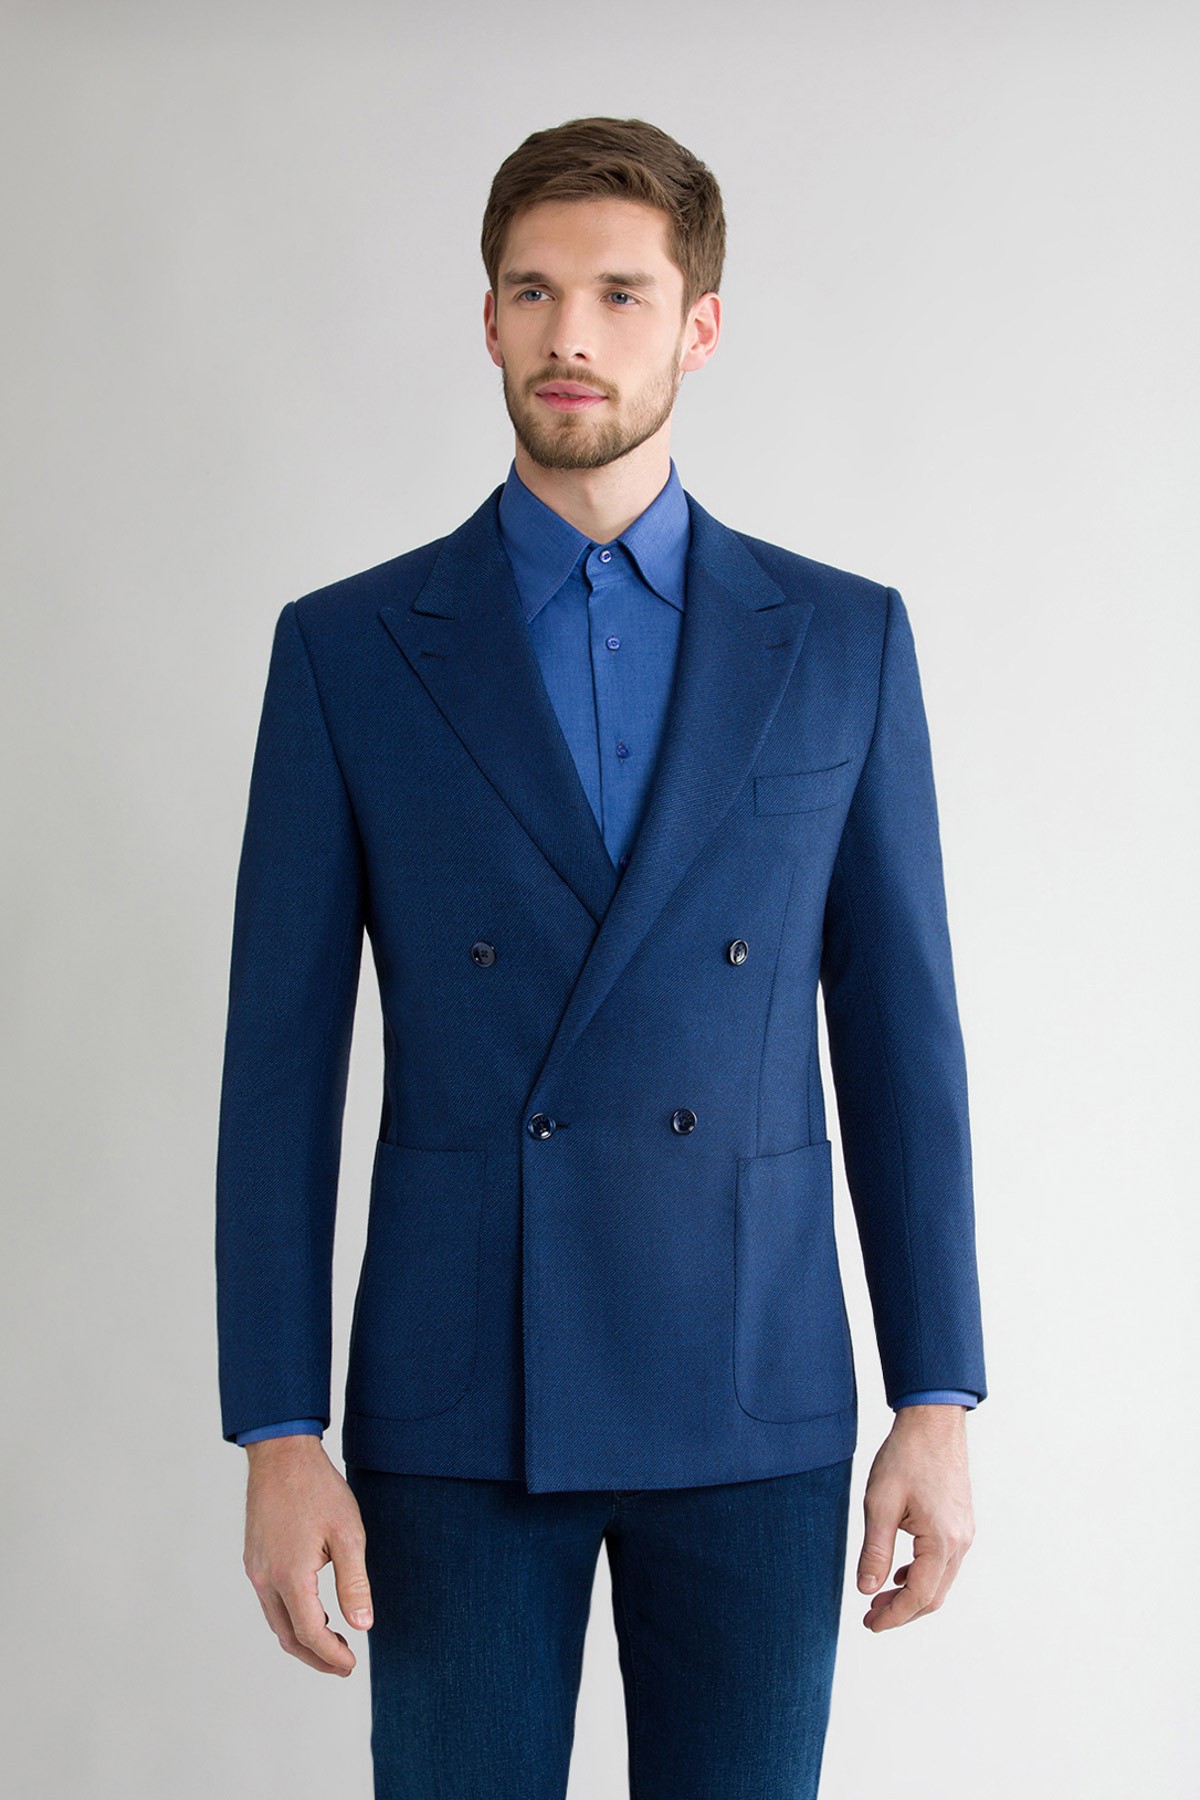 Blue double-breasted blazer